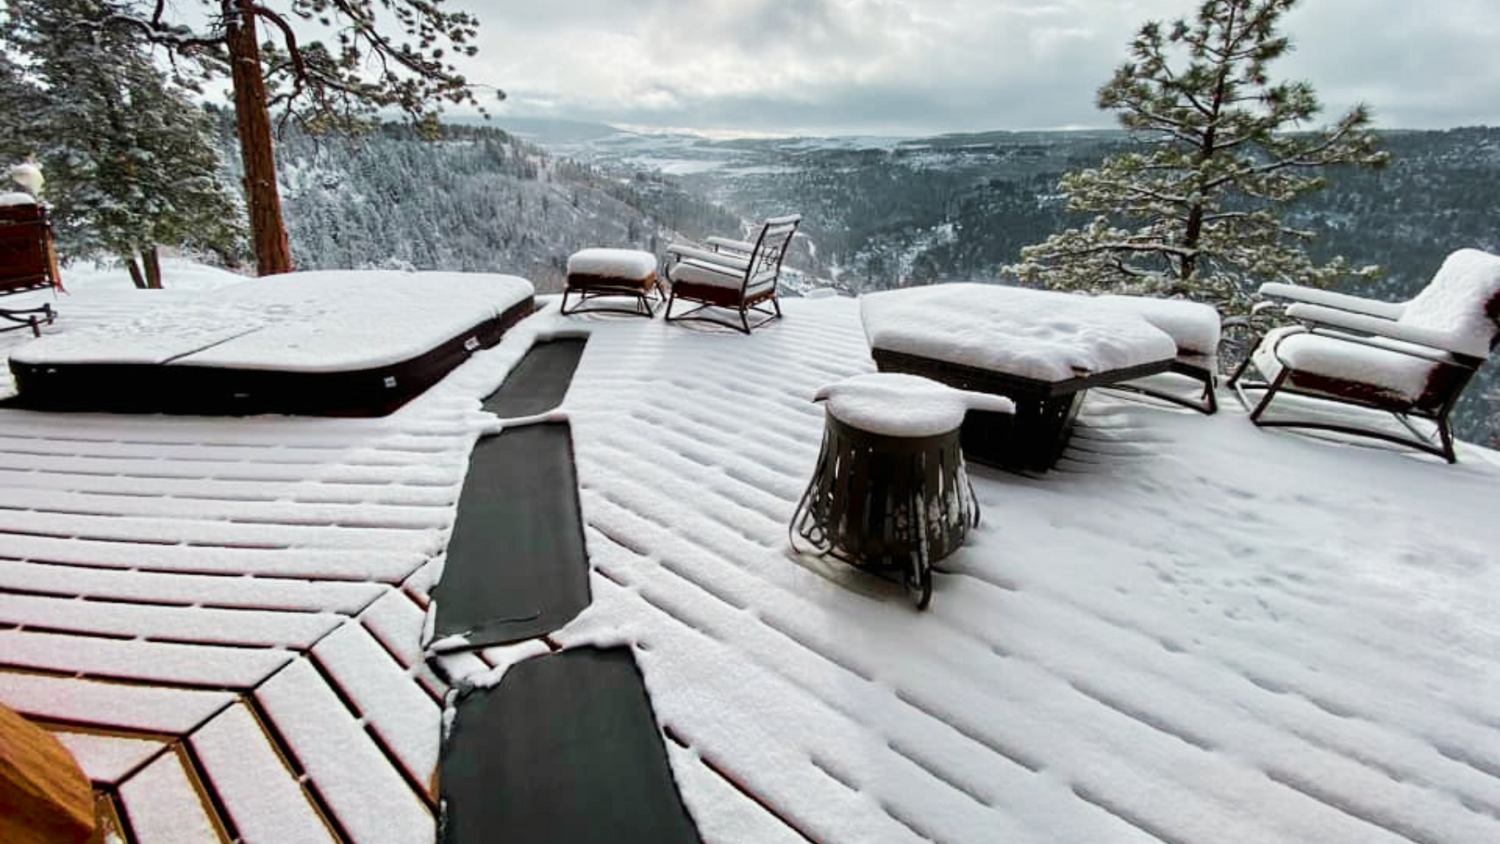 a trail of HeatTrak Snow & Ice Melting Mats is placed on a wooden, snowy deck with mountains and trees in the background